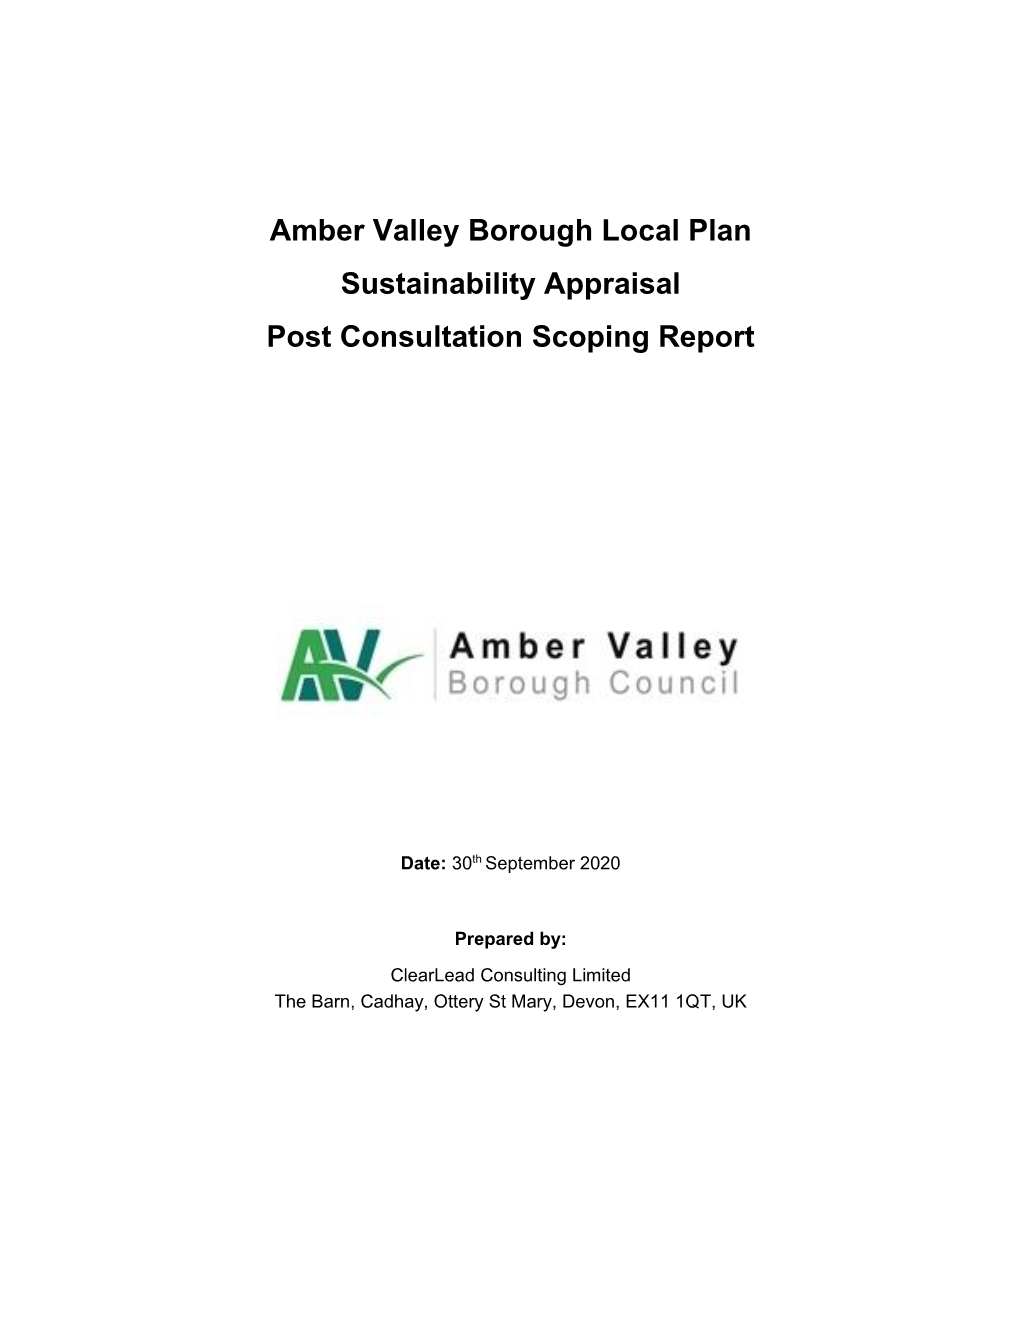 Amber Valley Borough Local Plan Sustainability Appraisal Post Consultation Scoping Report